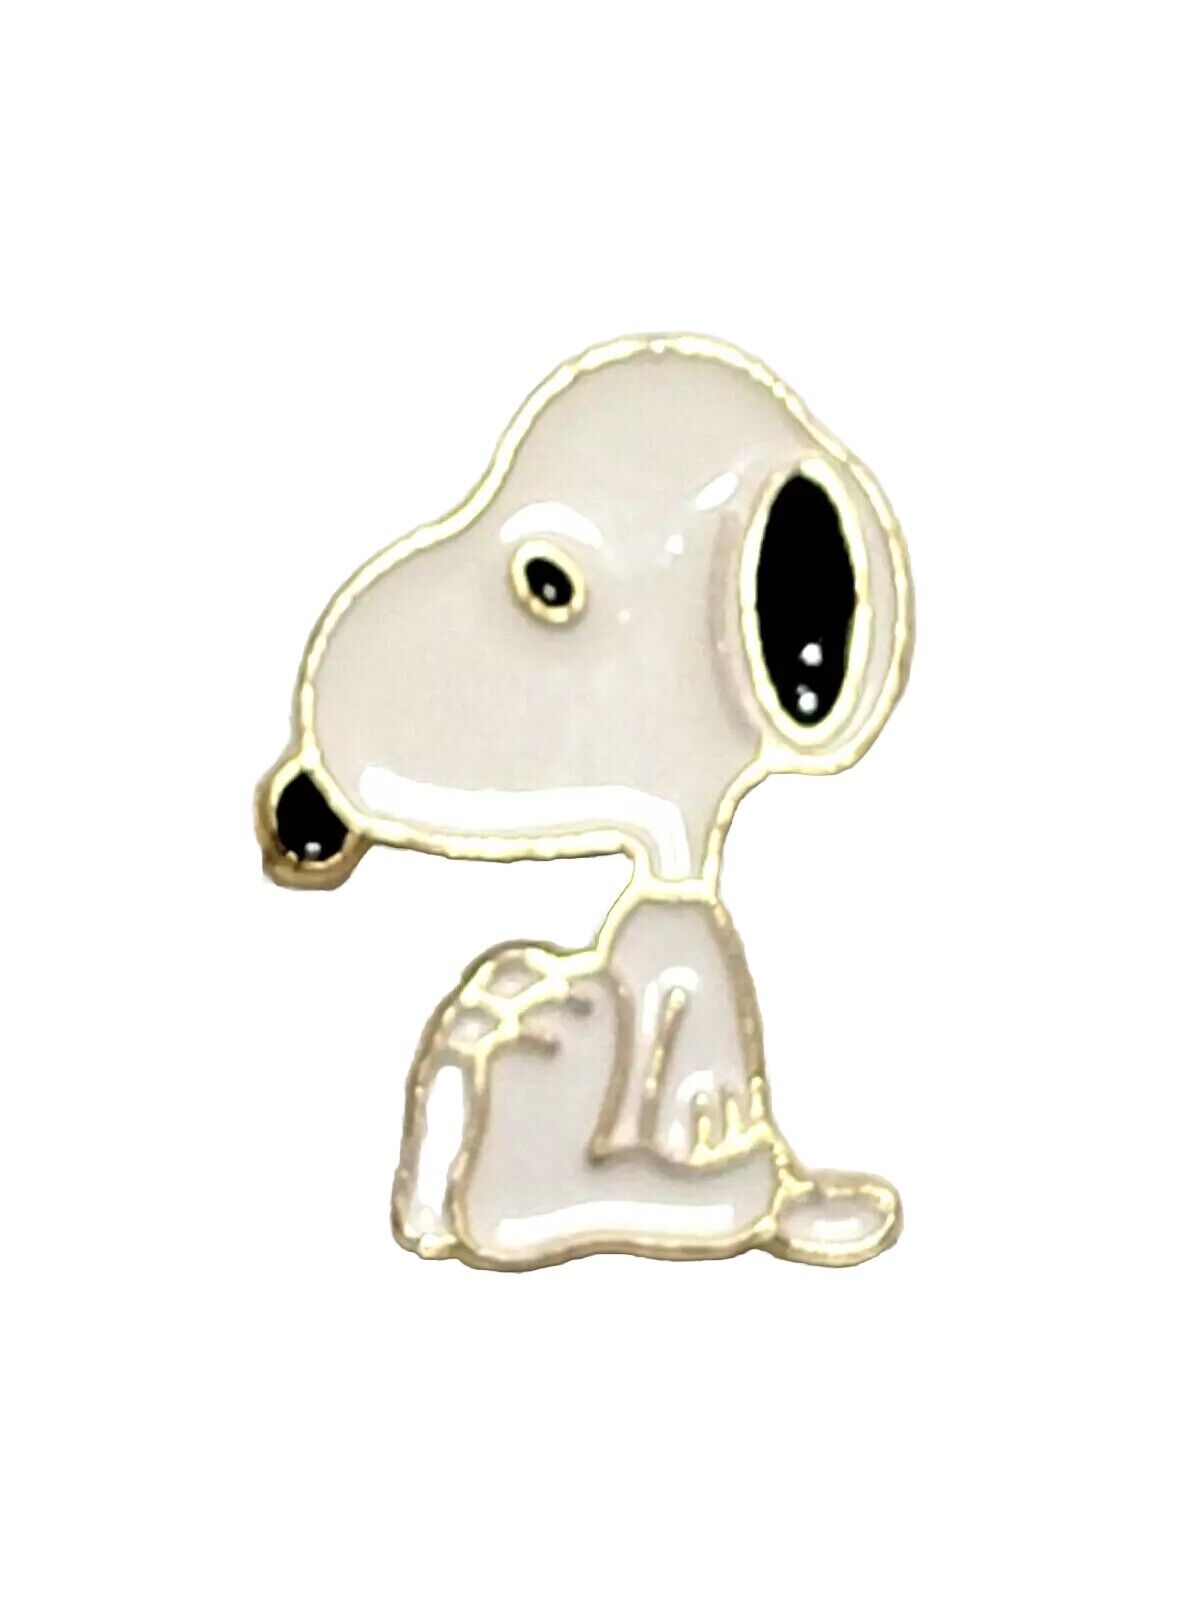 Snoopy Dog Button - UFS, 1965 - Peanuts - Charlie Brown